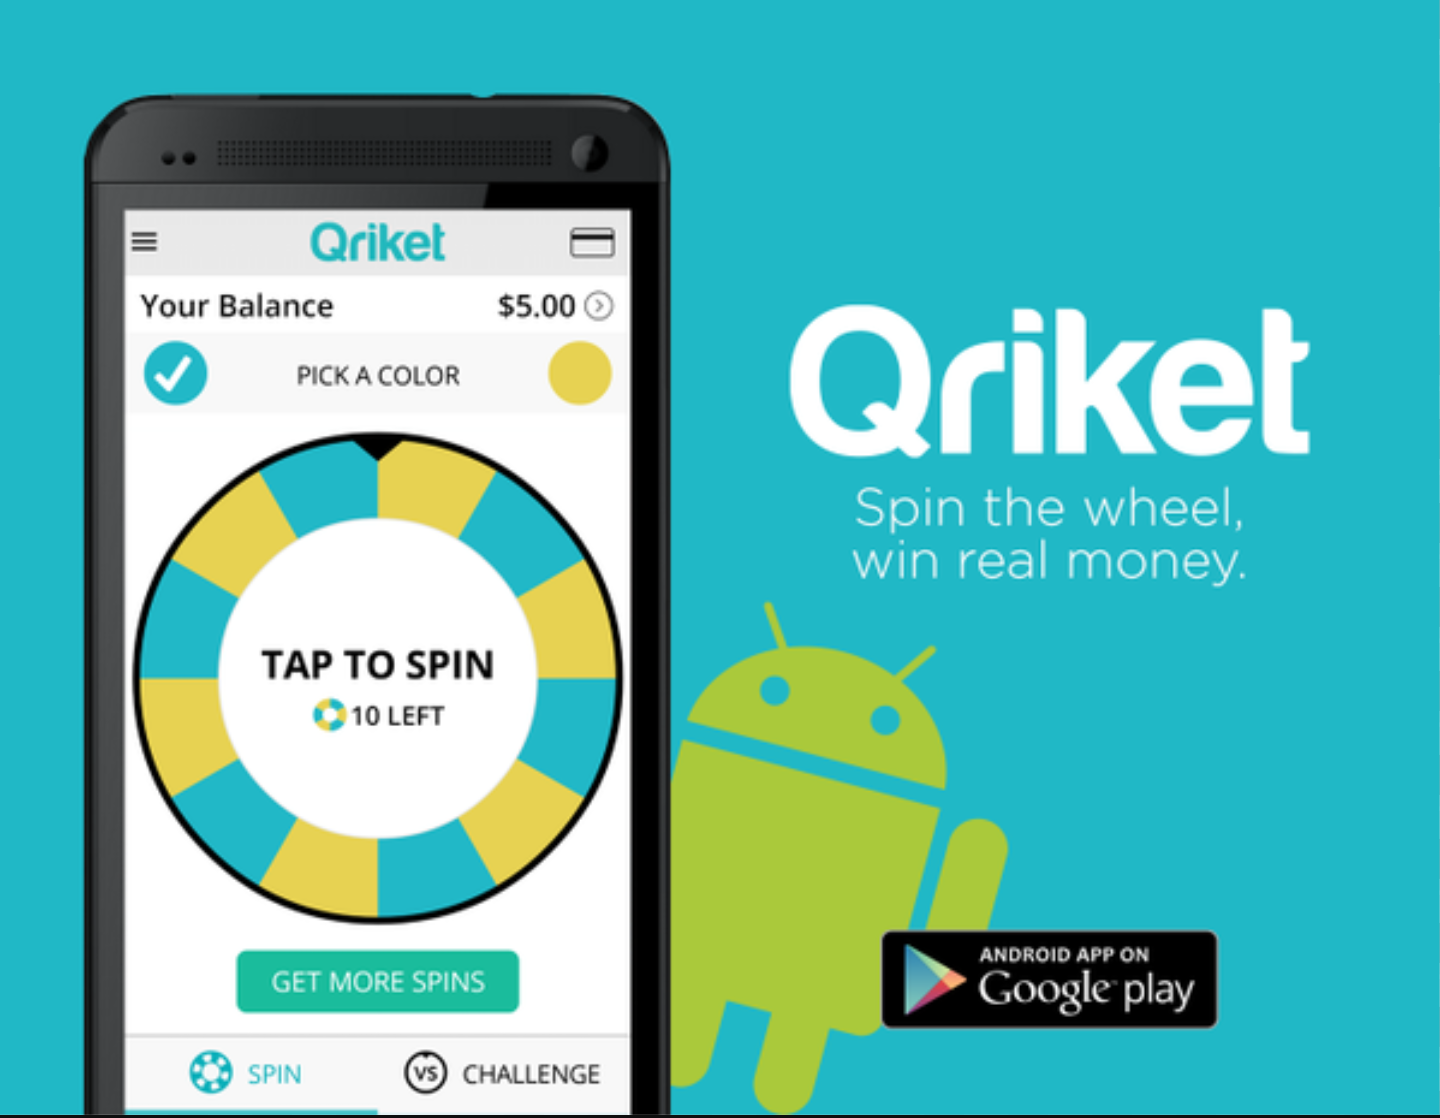 Span left. Spin Wheel and win real money. Android Spinner Picker. Qriket Hacks.